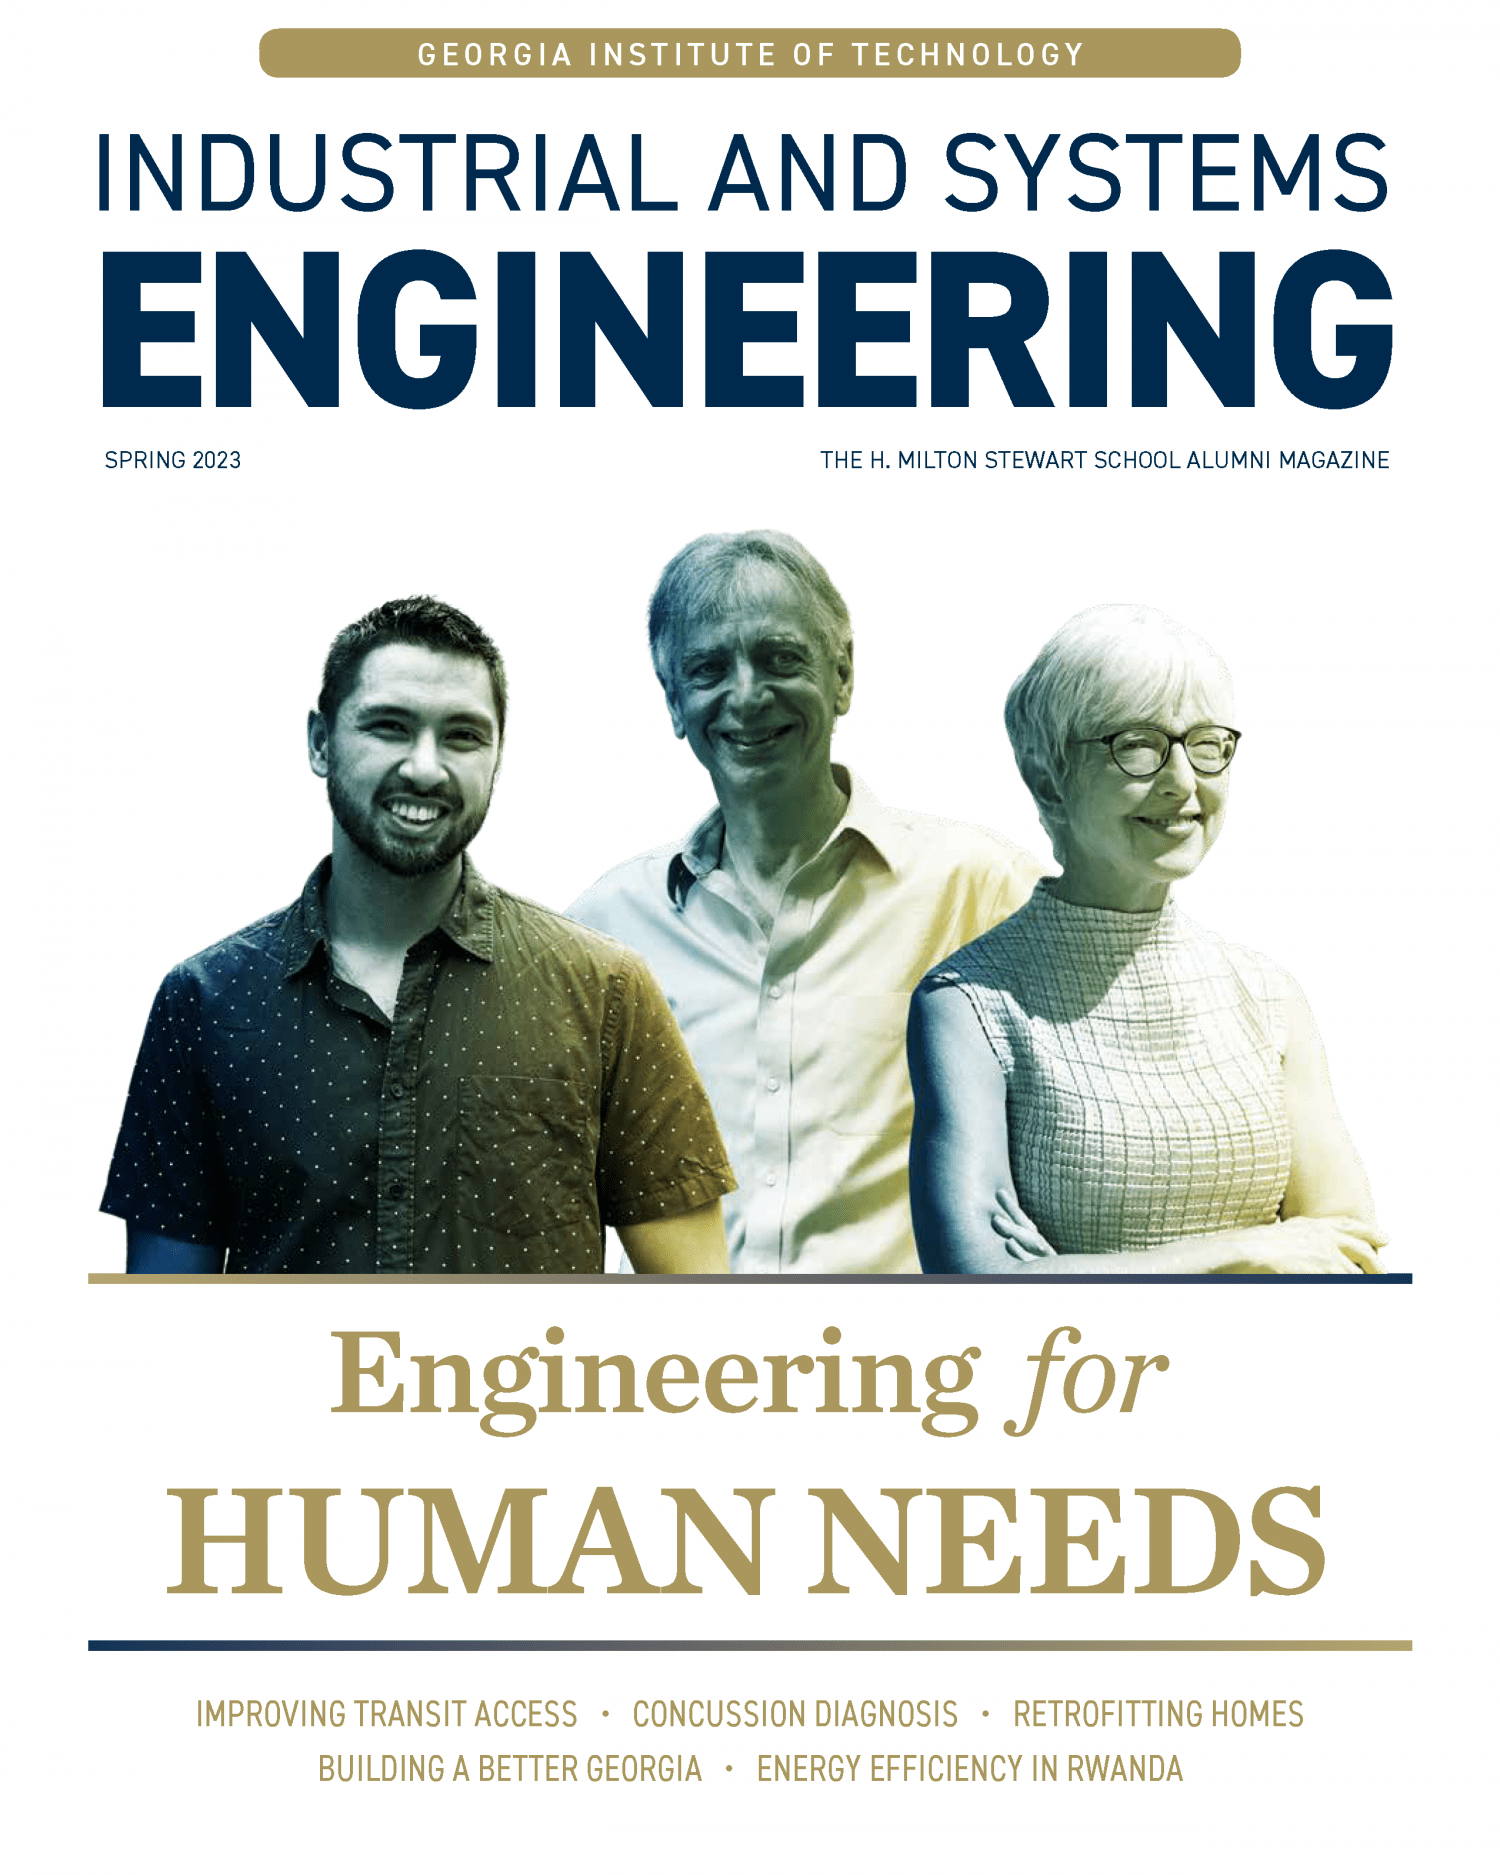 Spring 2023 magazine cover with 3 faculty members